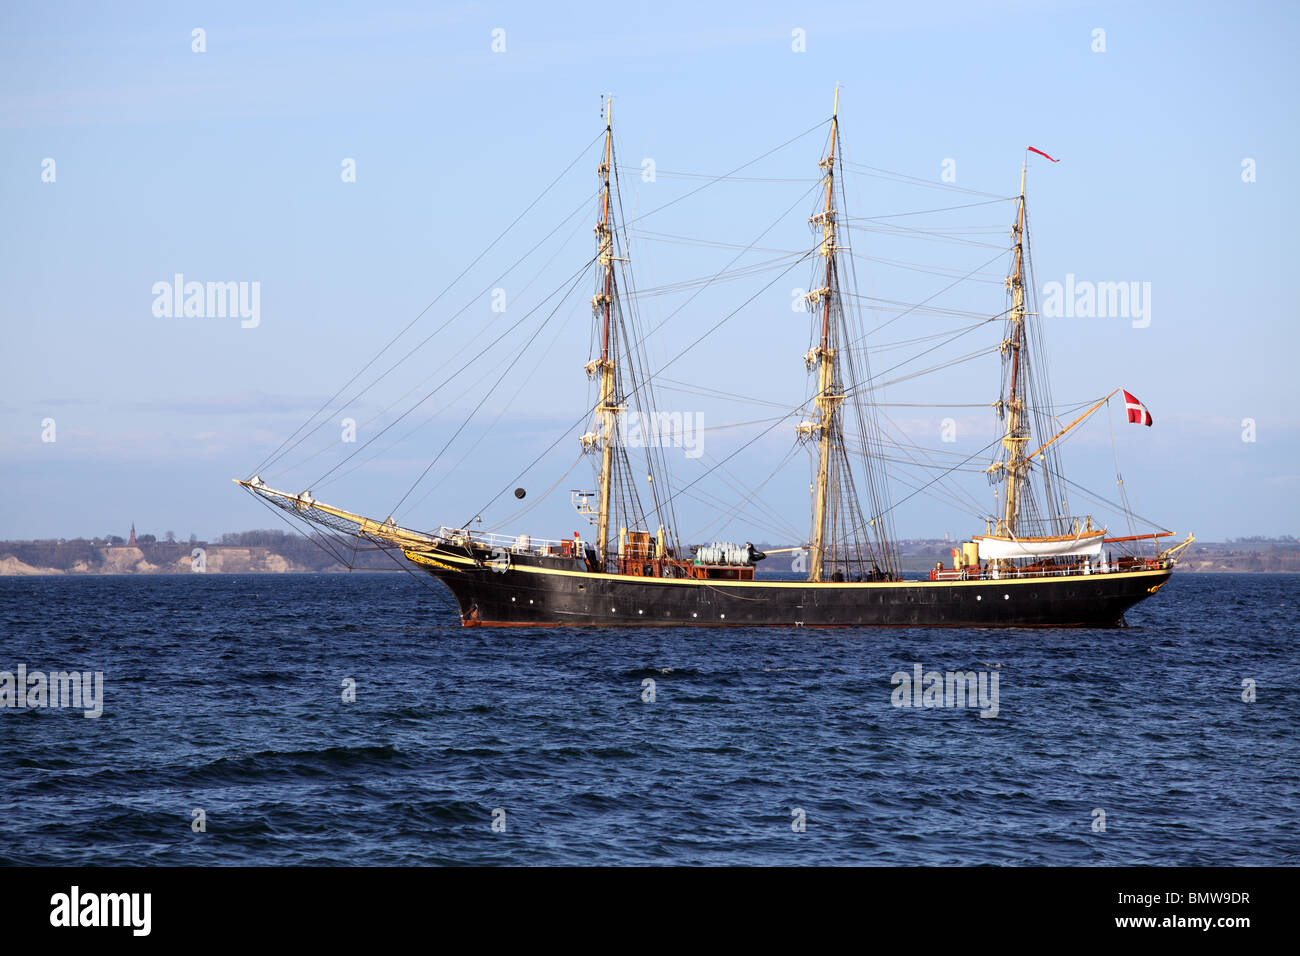 Georg Stage - a three-masted, full-rigged ship serving as a training ship lying at anchor near Vedbæk, Denmark. Stock Photo